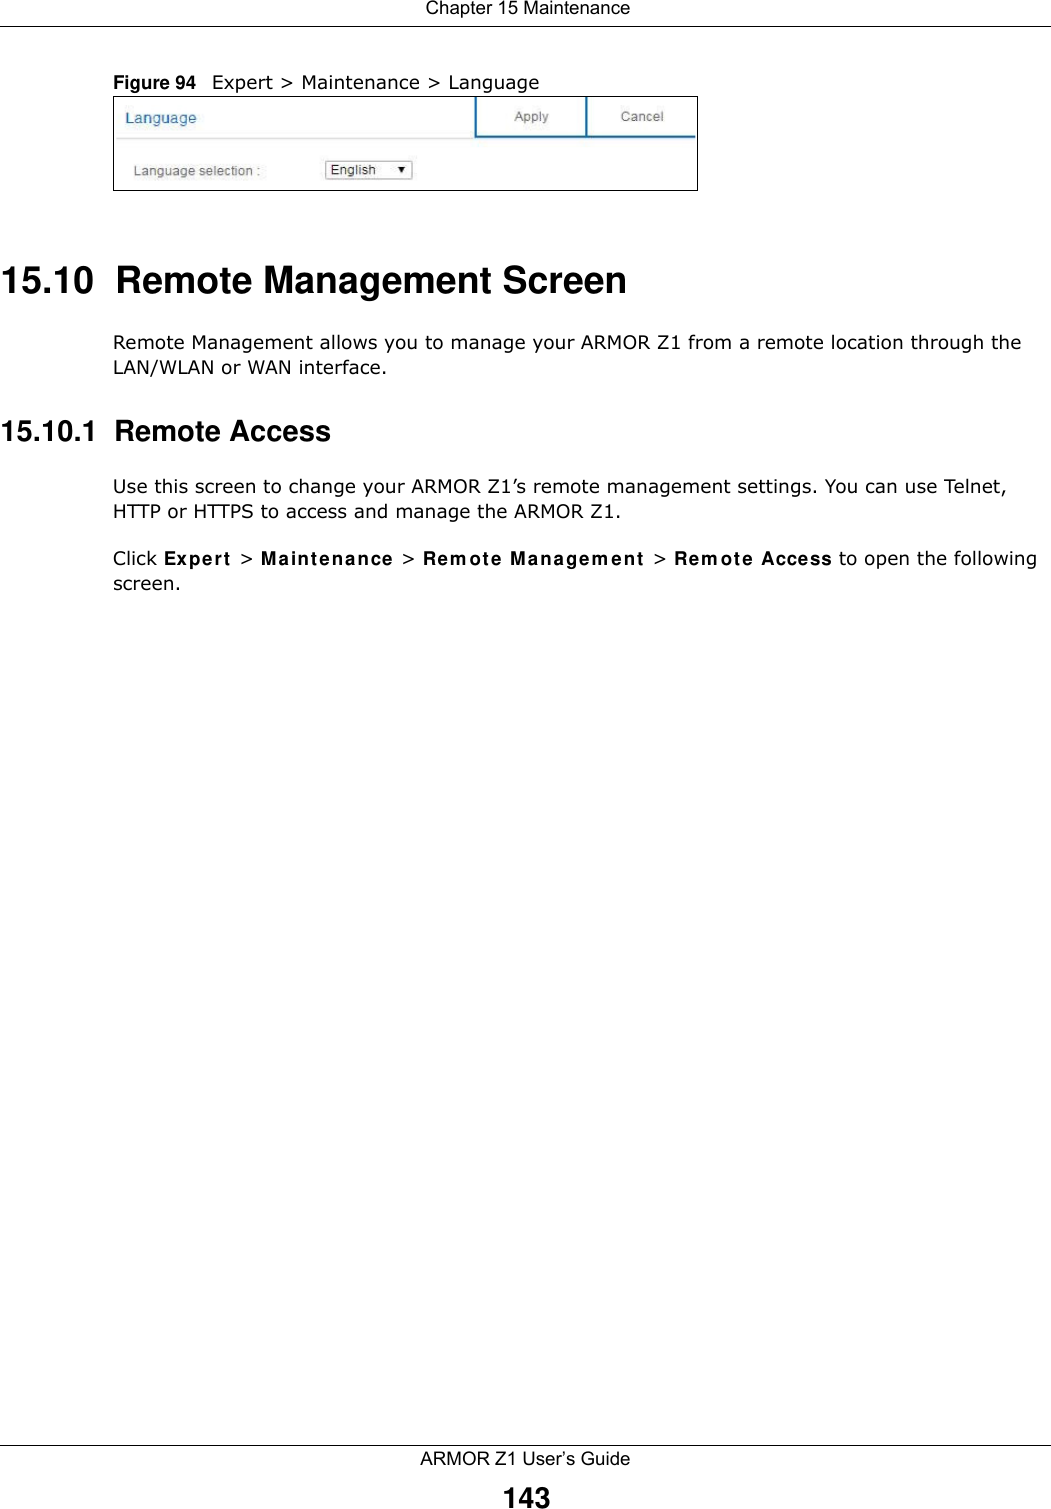  Chapter 15 MaintenanceARMOR Z1 User’s Guide143Figure 94   Expert &gt; Maintenance &gt; Language 15.10  Remote Management ScreenRemote Management allows you to manage your ARMOR Z1 from a remote location through the LAN/WLAN or WAN interface.15.10.1  Remote Access Use this screen to change your ARMOR Z1’s remote management settings. You can use Telnet,  HTTP or HTTPS to access and manage the ARMOR Z1. Click Expert &gt; Maintenance &gt; Remote Management &gt; Remote Access to open the following screen.